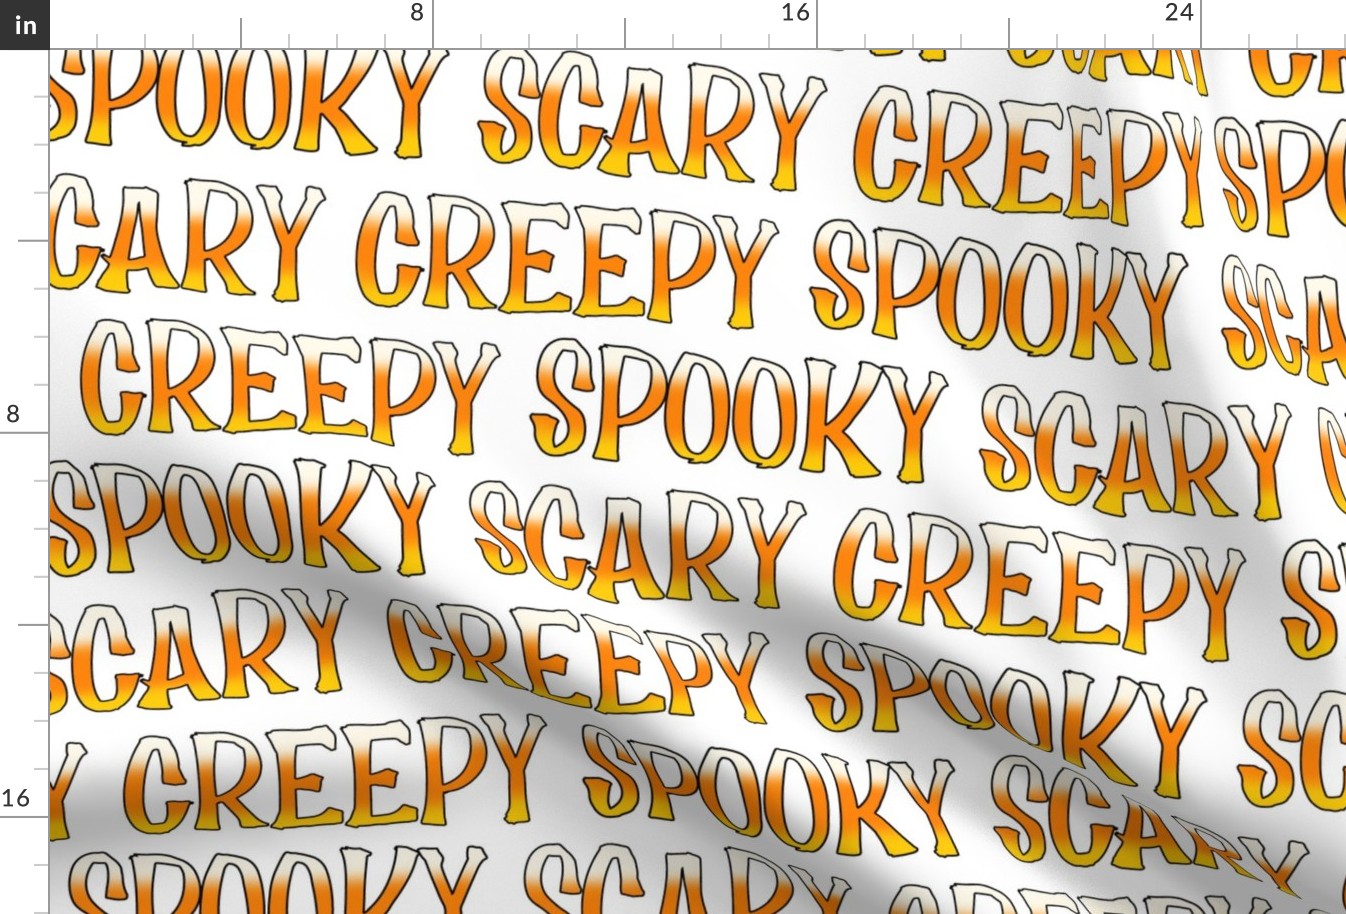 Spooky, Scary, Creepy Candy Corn words on white - large scale